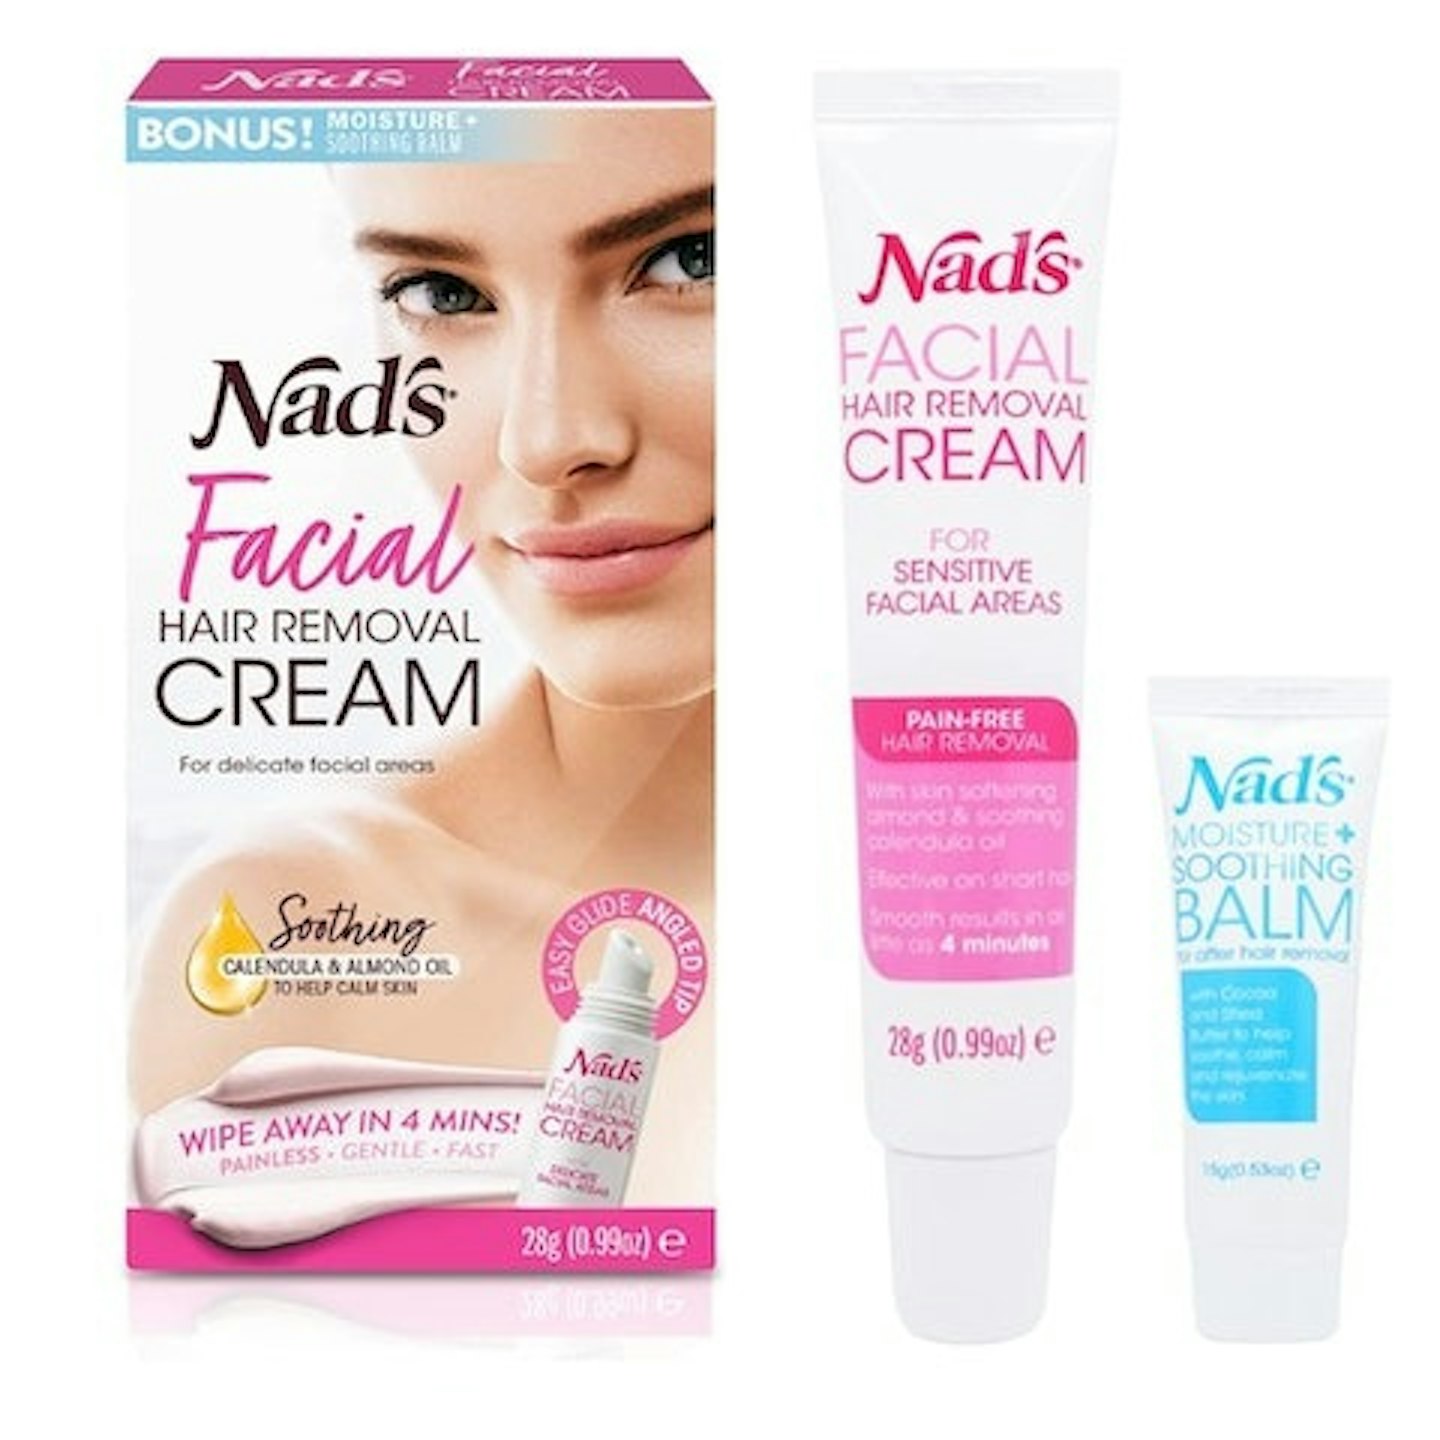 Nad's Facial Hair Removal Cream and Soothing Balm 28g